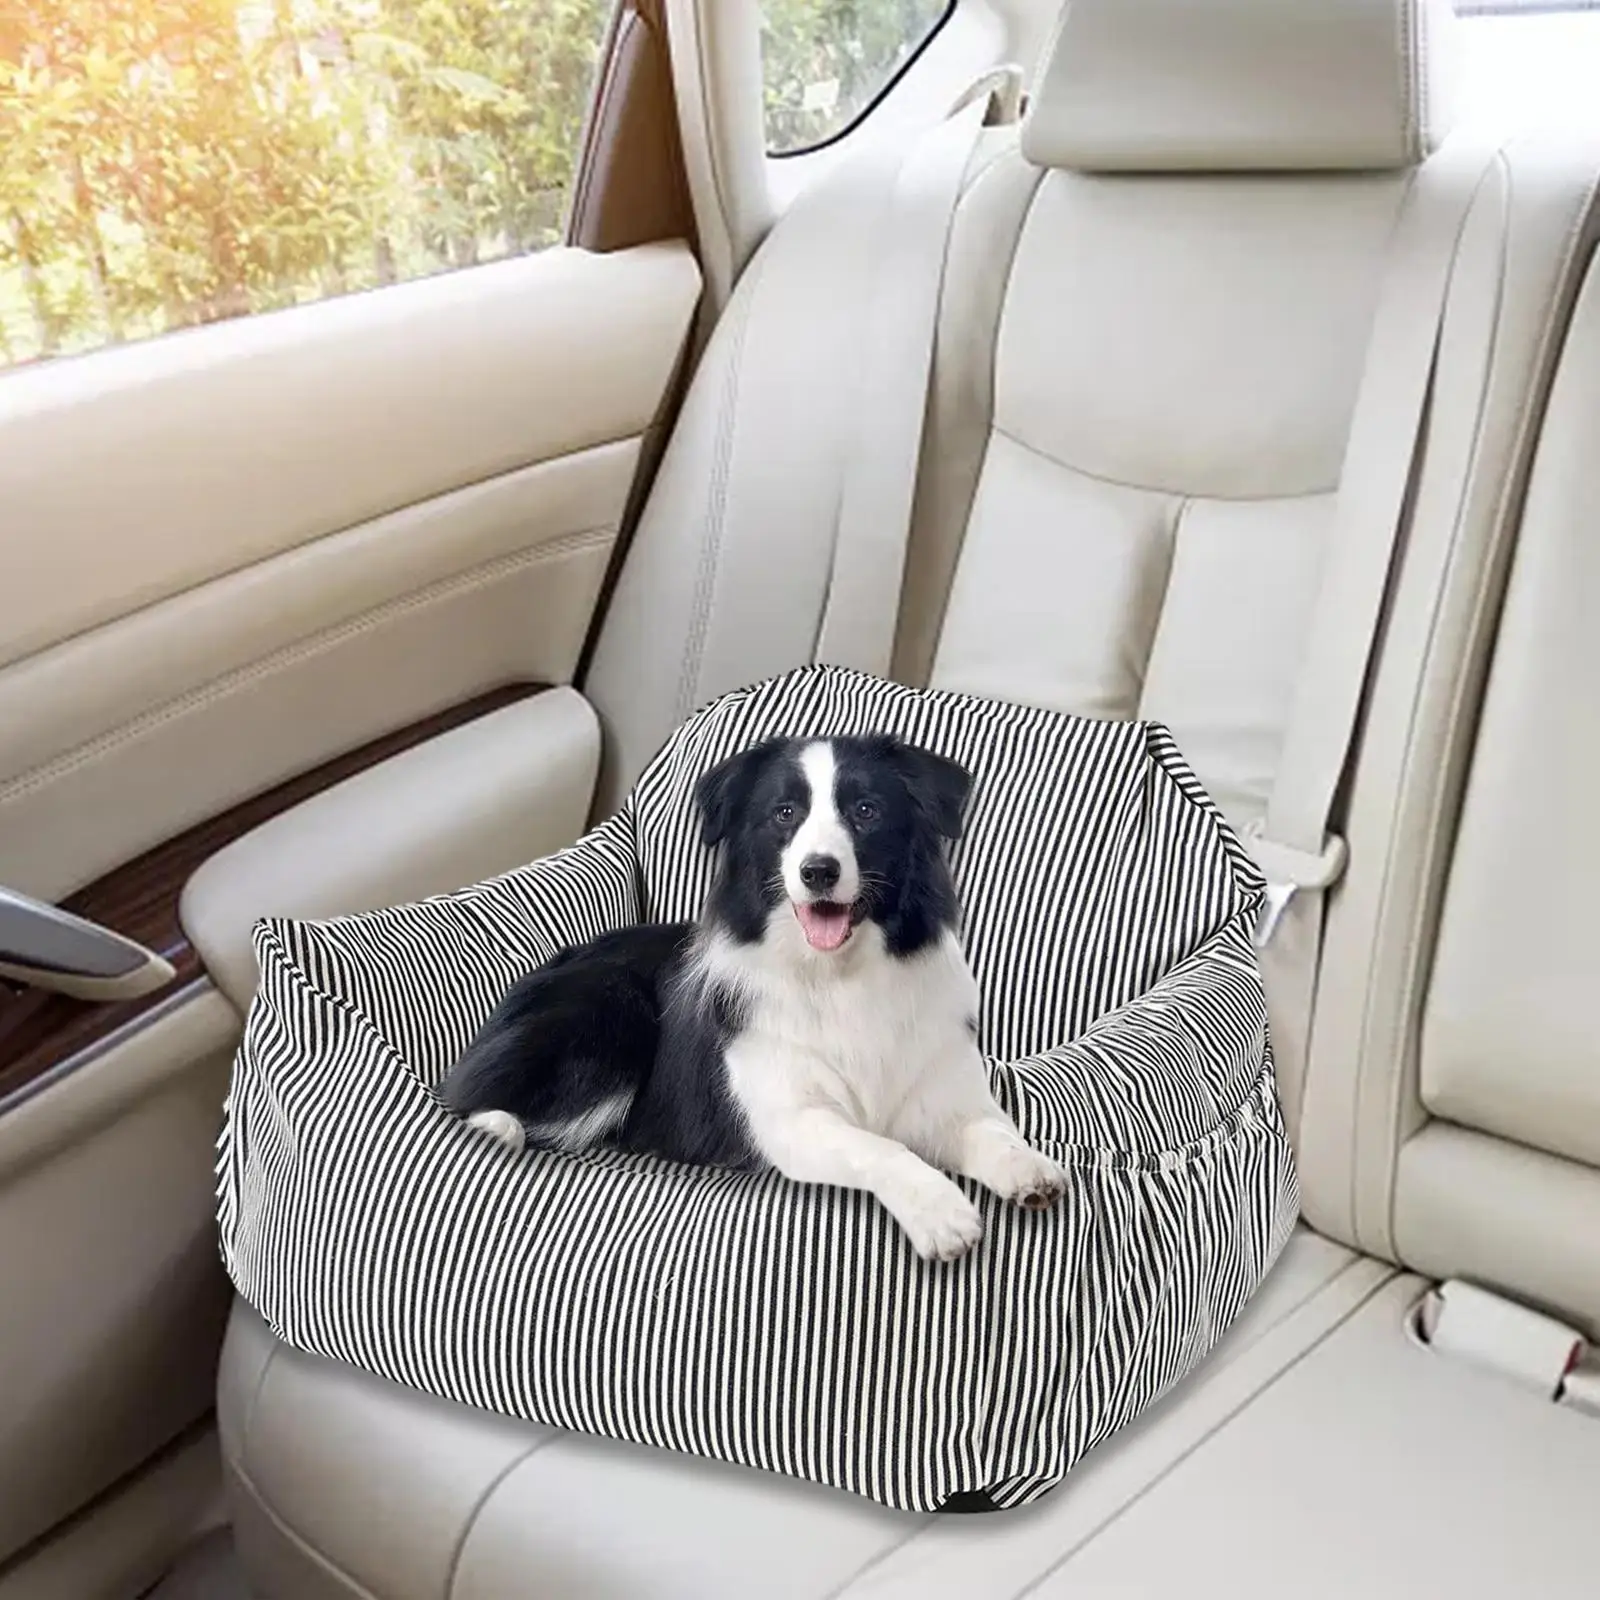 Dog Car SUV Seat Pet Bed with Fixed Strap Easily Install Multifunctional Accessories Detachable Cover Washable for Traveling